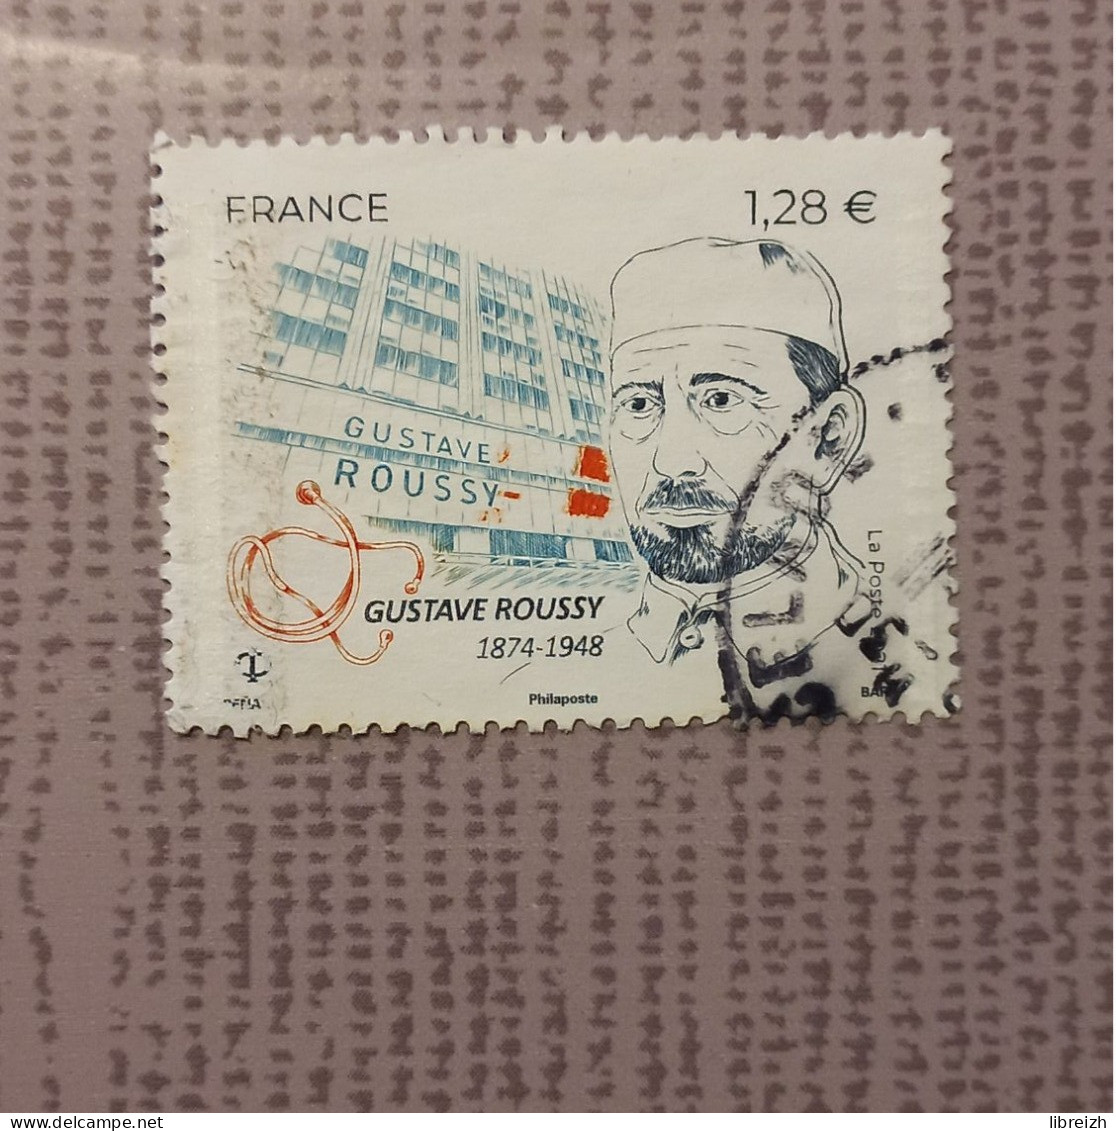 Gustave Roussy  N° 5521  Année 2021 ( Cachet Rond ) - Usados